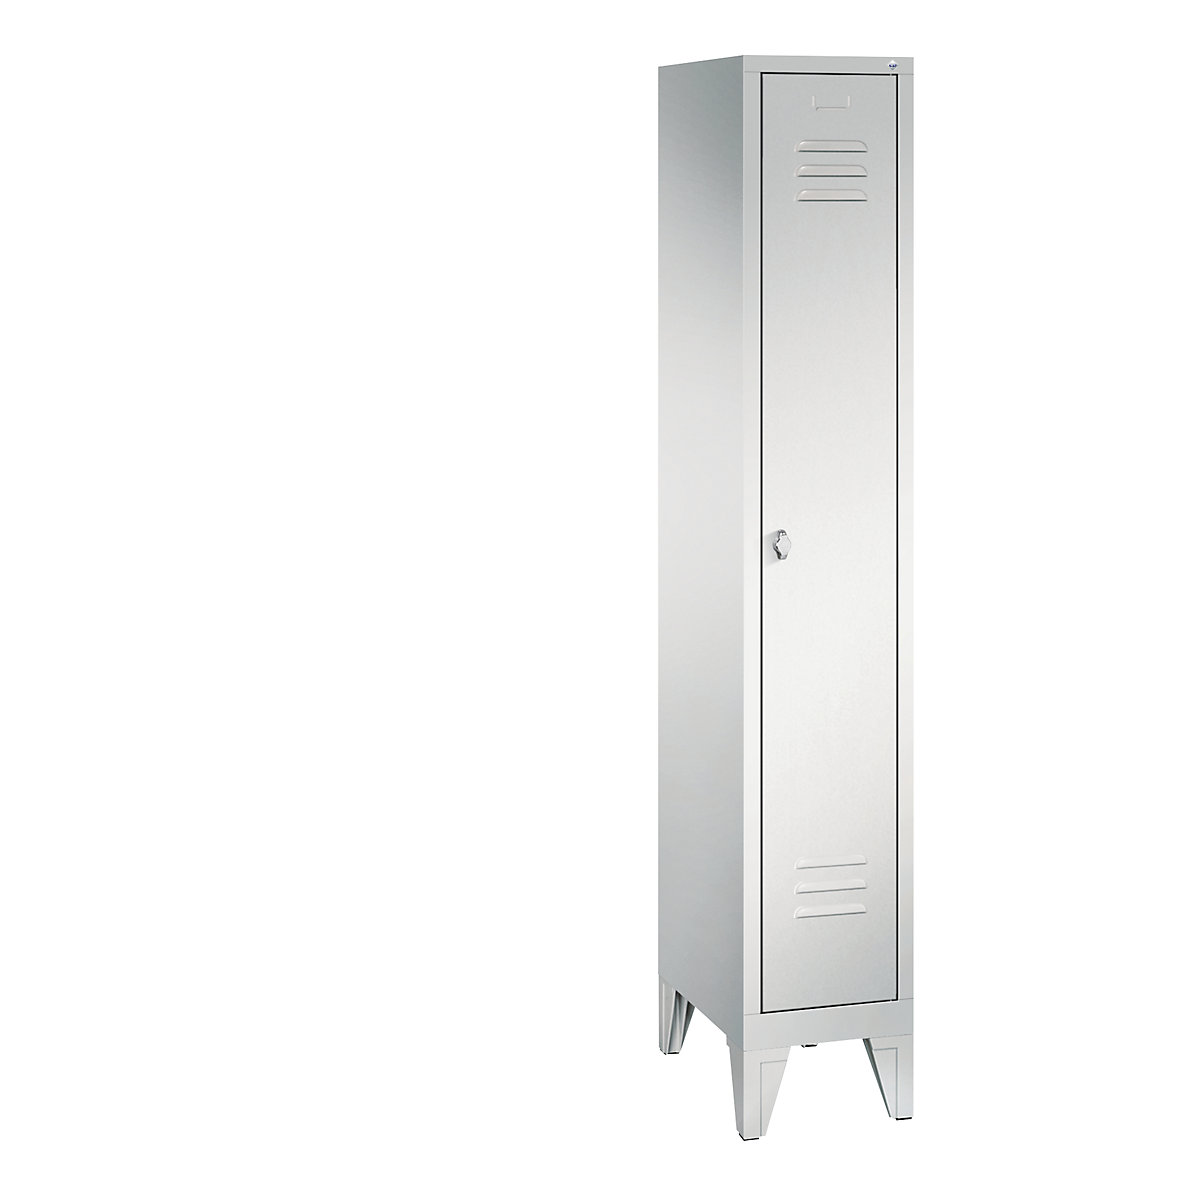 CLASSIC cloakroom locker with feet – C+P, 1 compartment, compartment width 300 mm, light grey-6